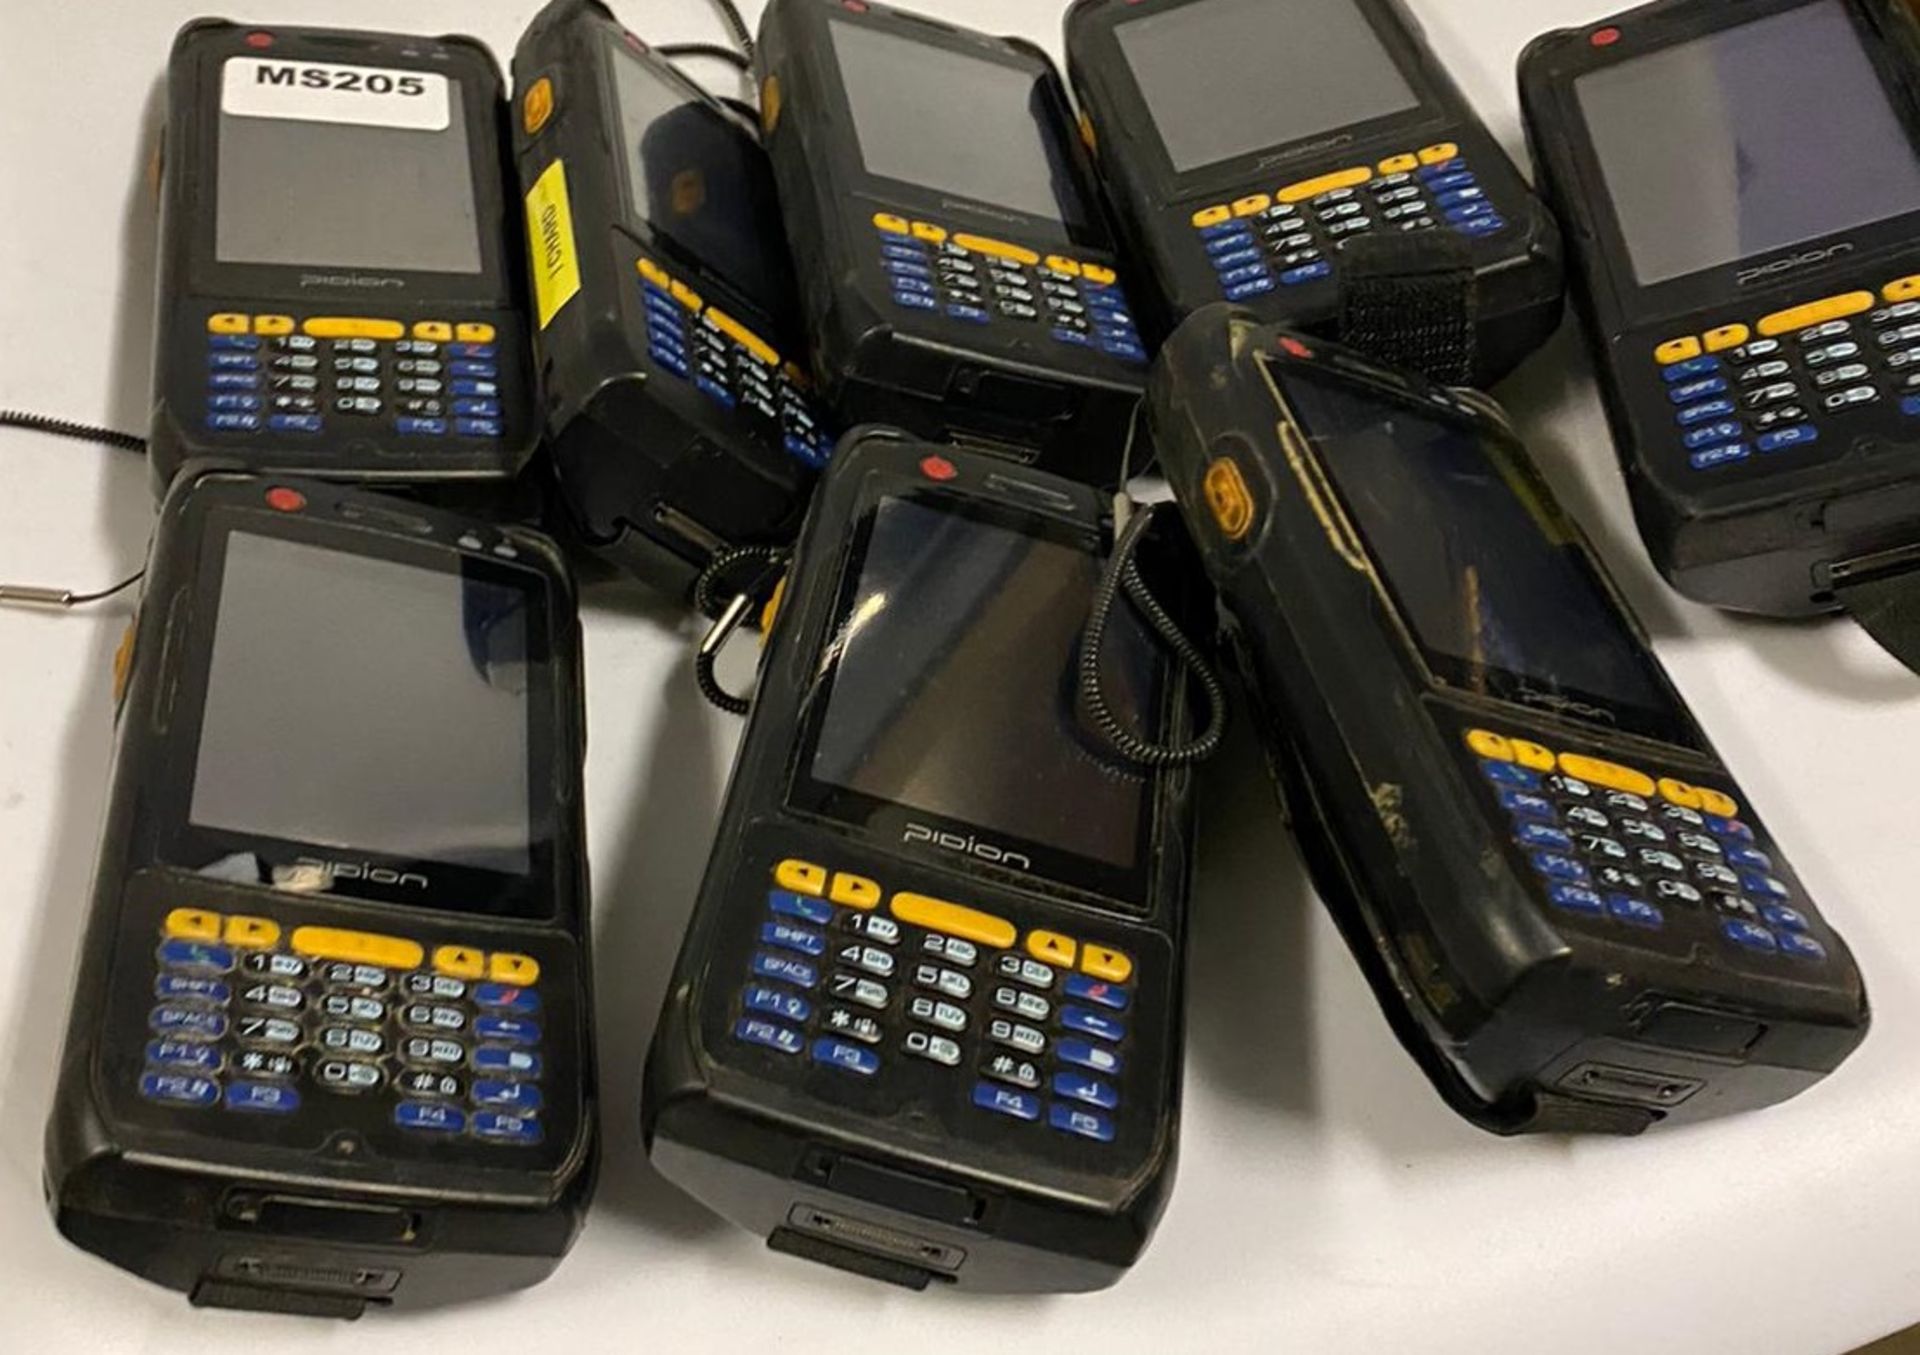 8 x Pidion BIP-6000 Handheld Mobile Computer With Barcode Scanning Capability - Used Condition - - Image 2 of 5